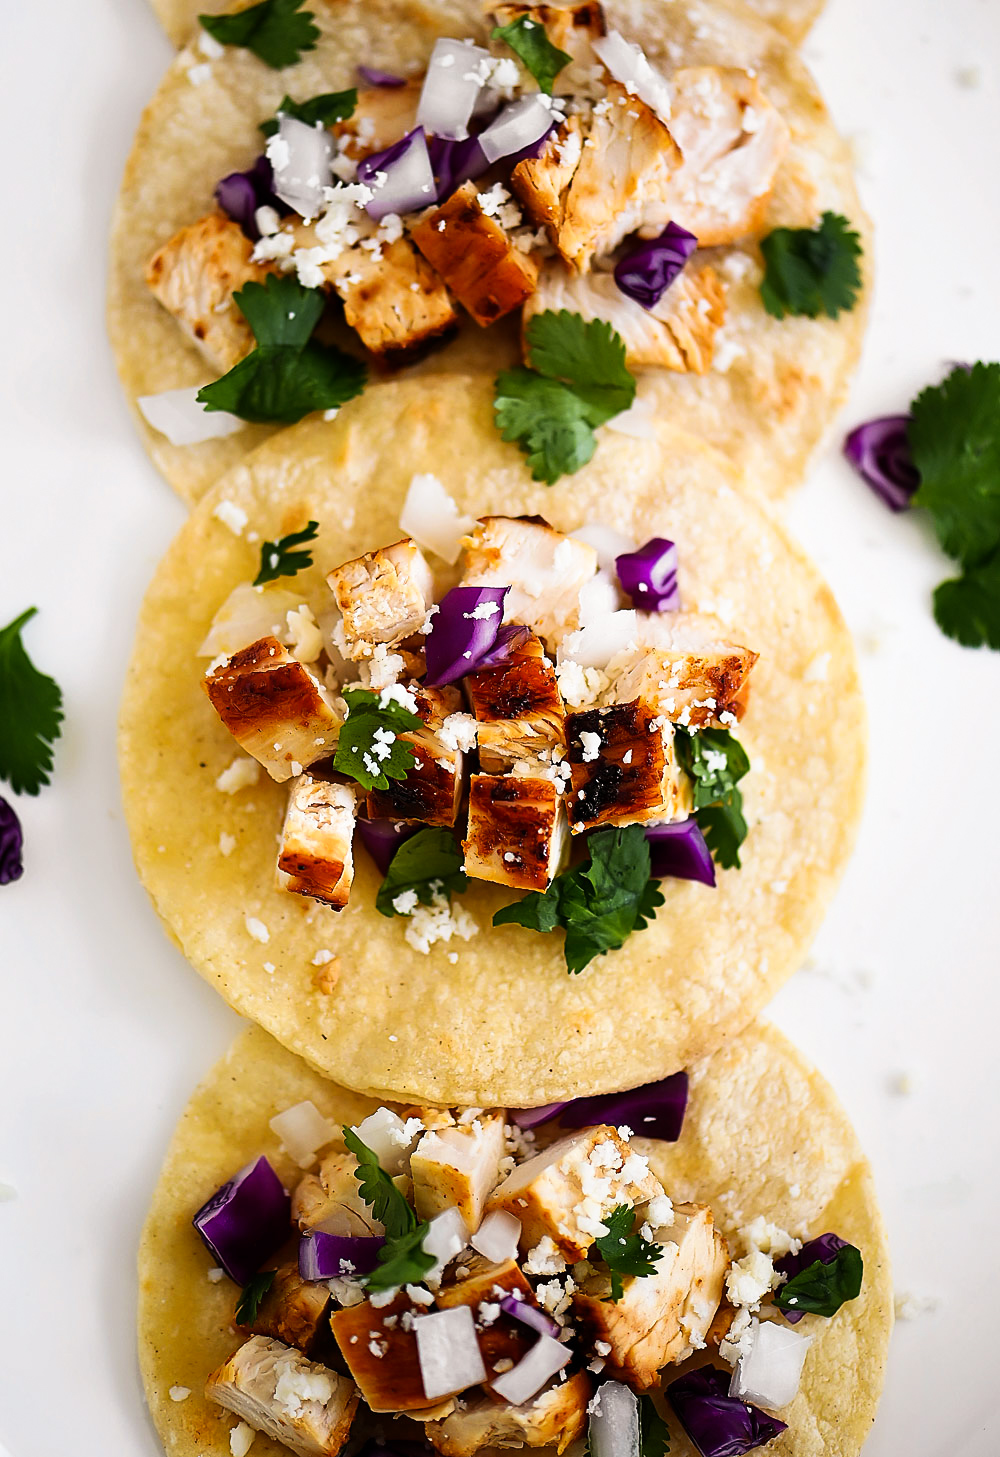 Chicken Street Tacos are filled with grilled chicken, onion, cabbage and fresh cilantro. Life-in-the-Lofthouse.com